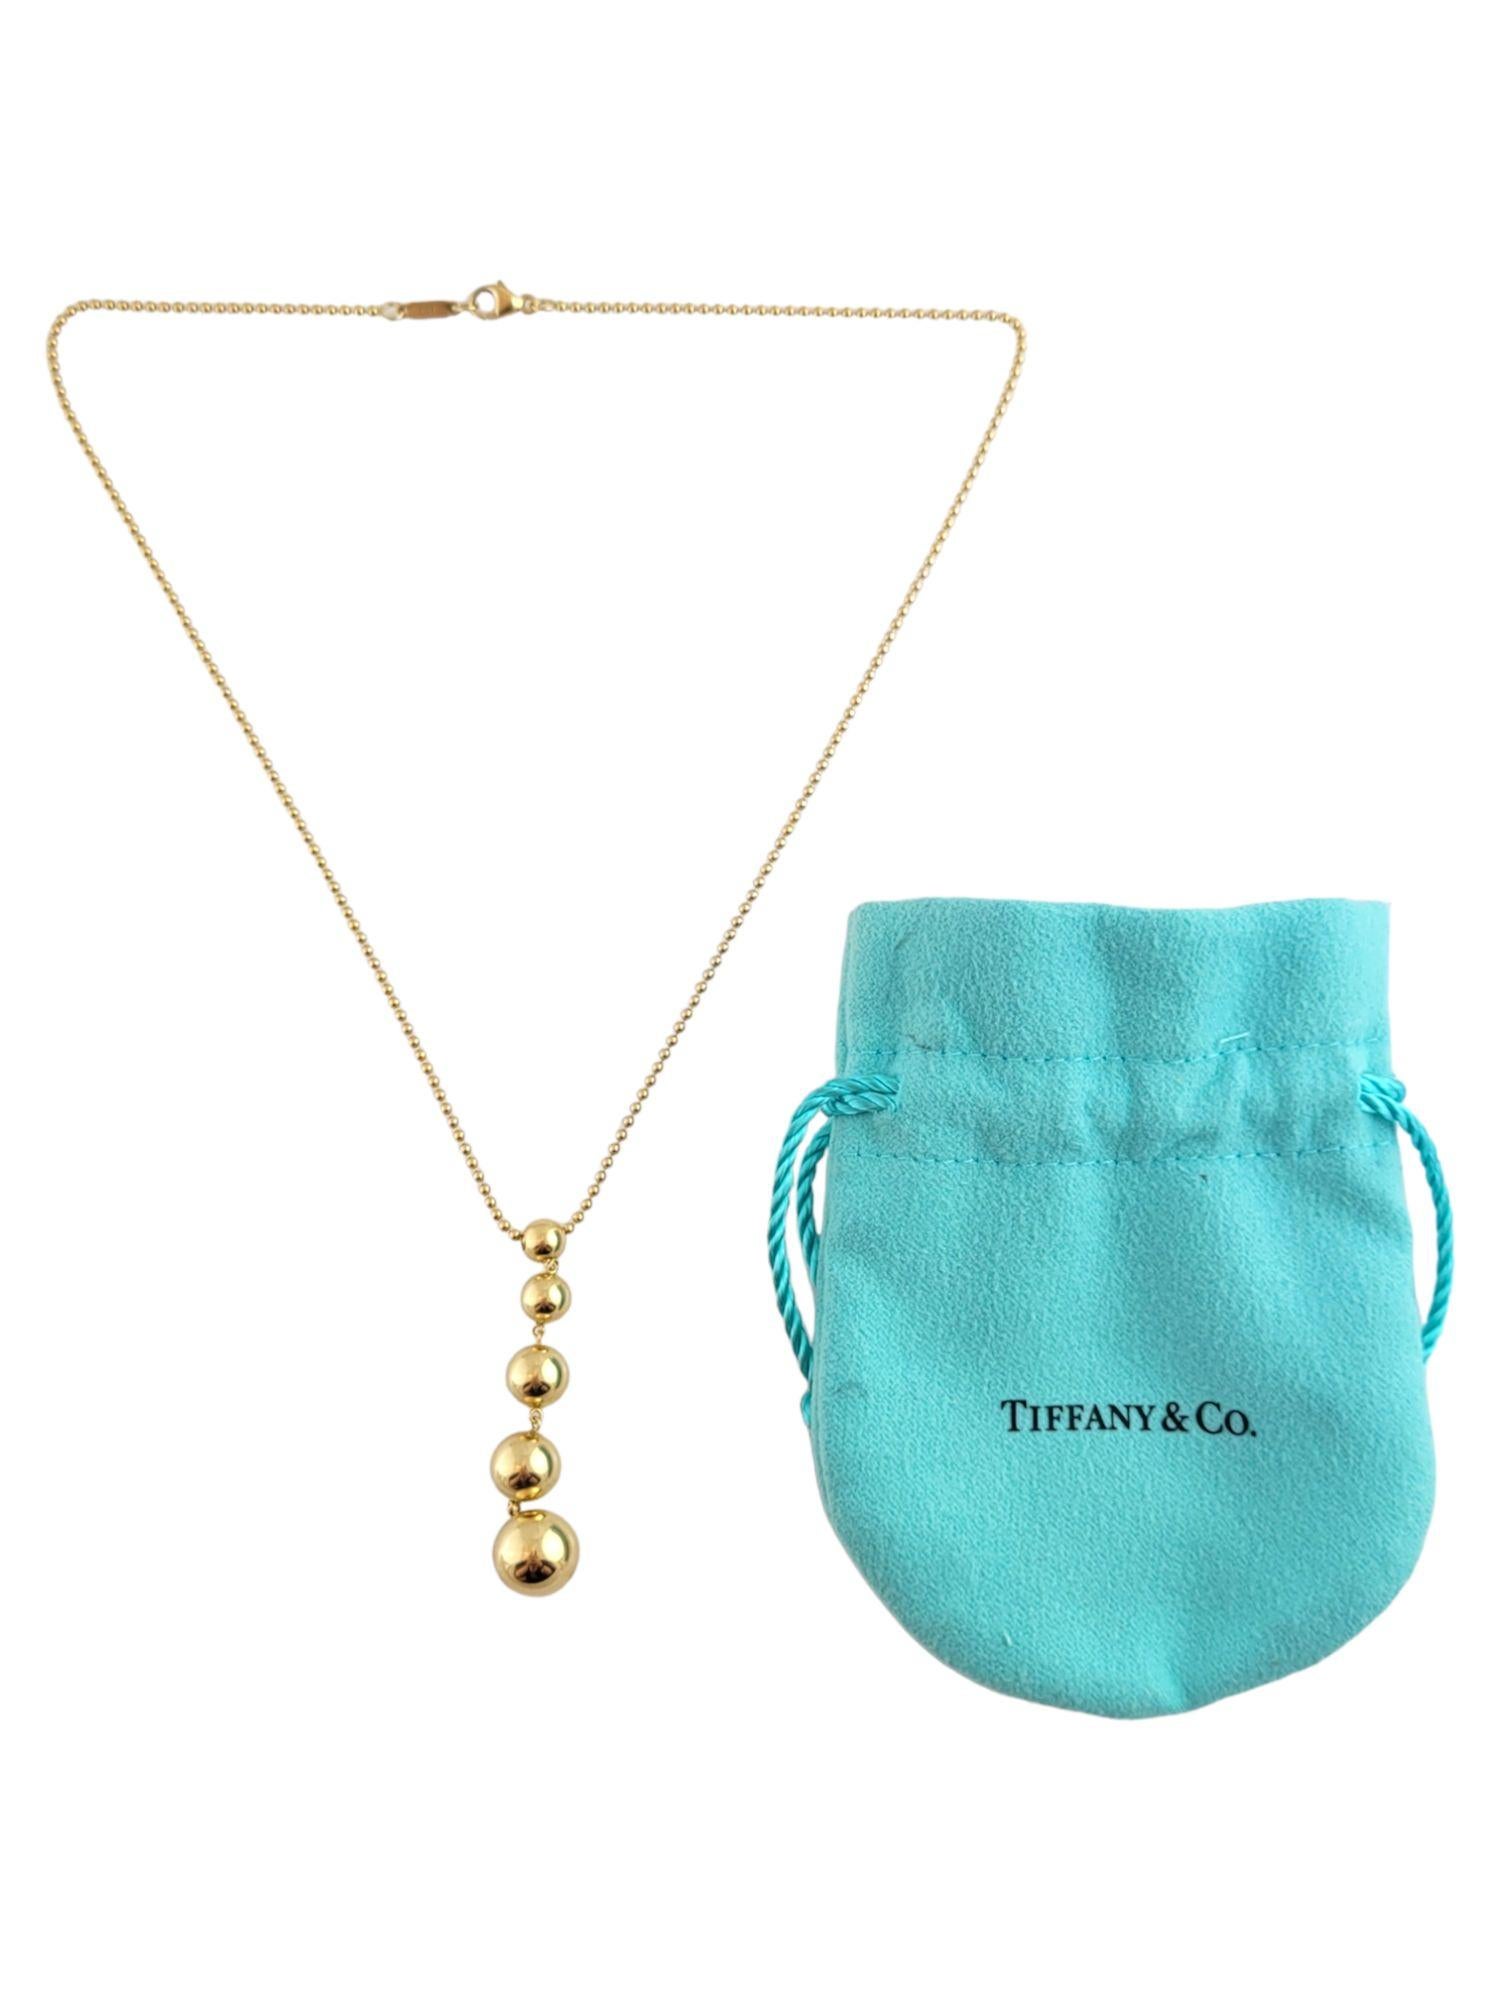 This gorgeous, graduated bead drop necklace by Tiffany & Co is crafted from 18K yellow gold!

Size: 49.3mm X 10.3mm X 10.3mm

Chain Length: 16 1/4